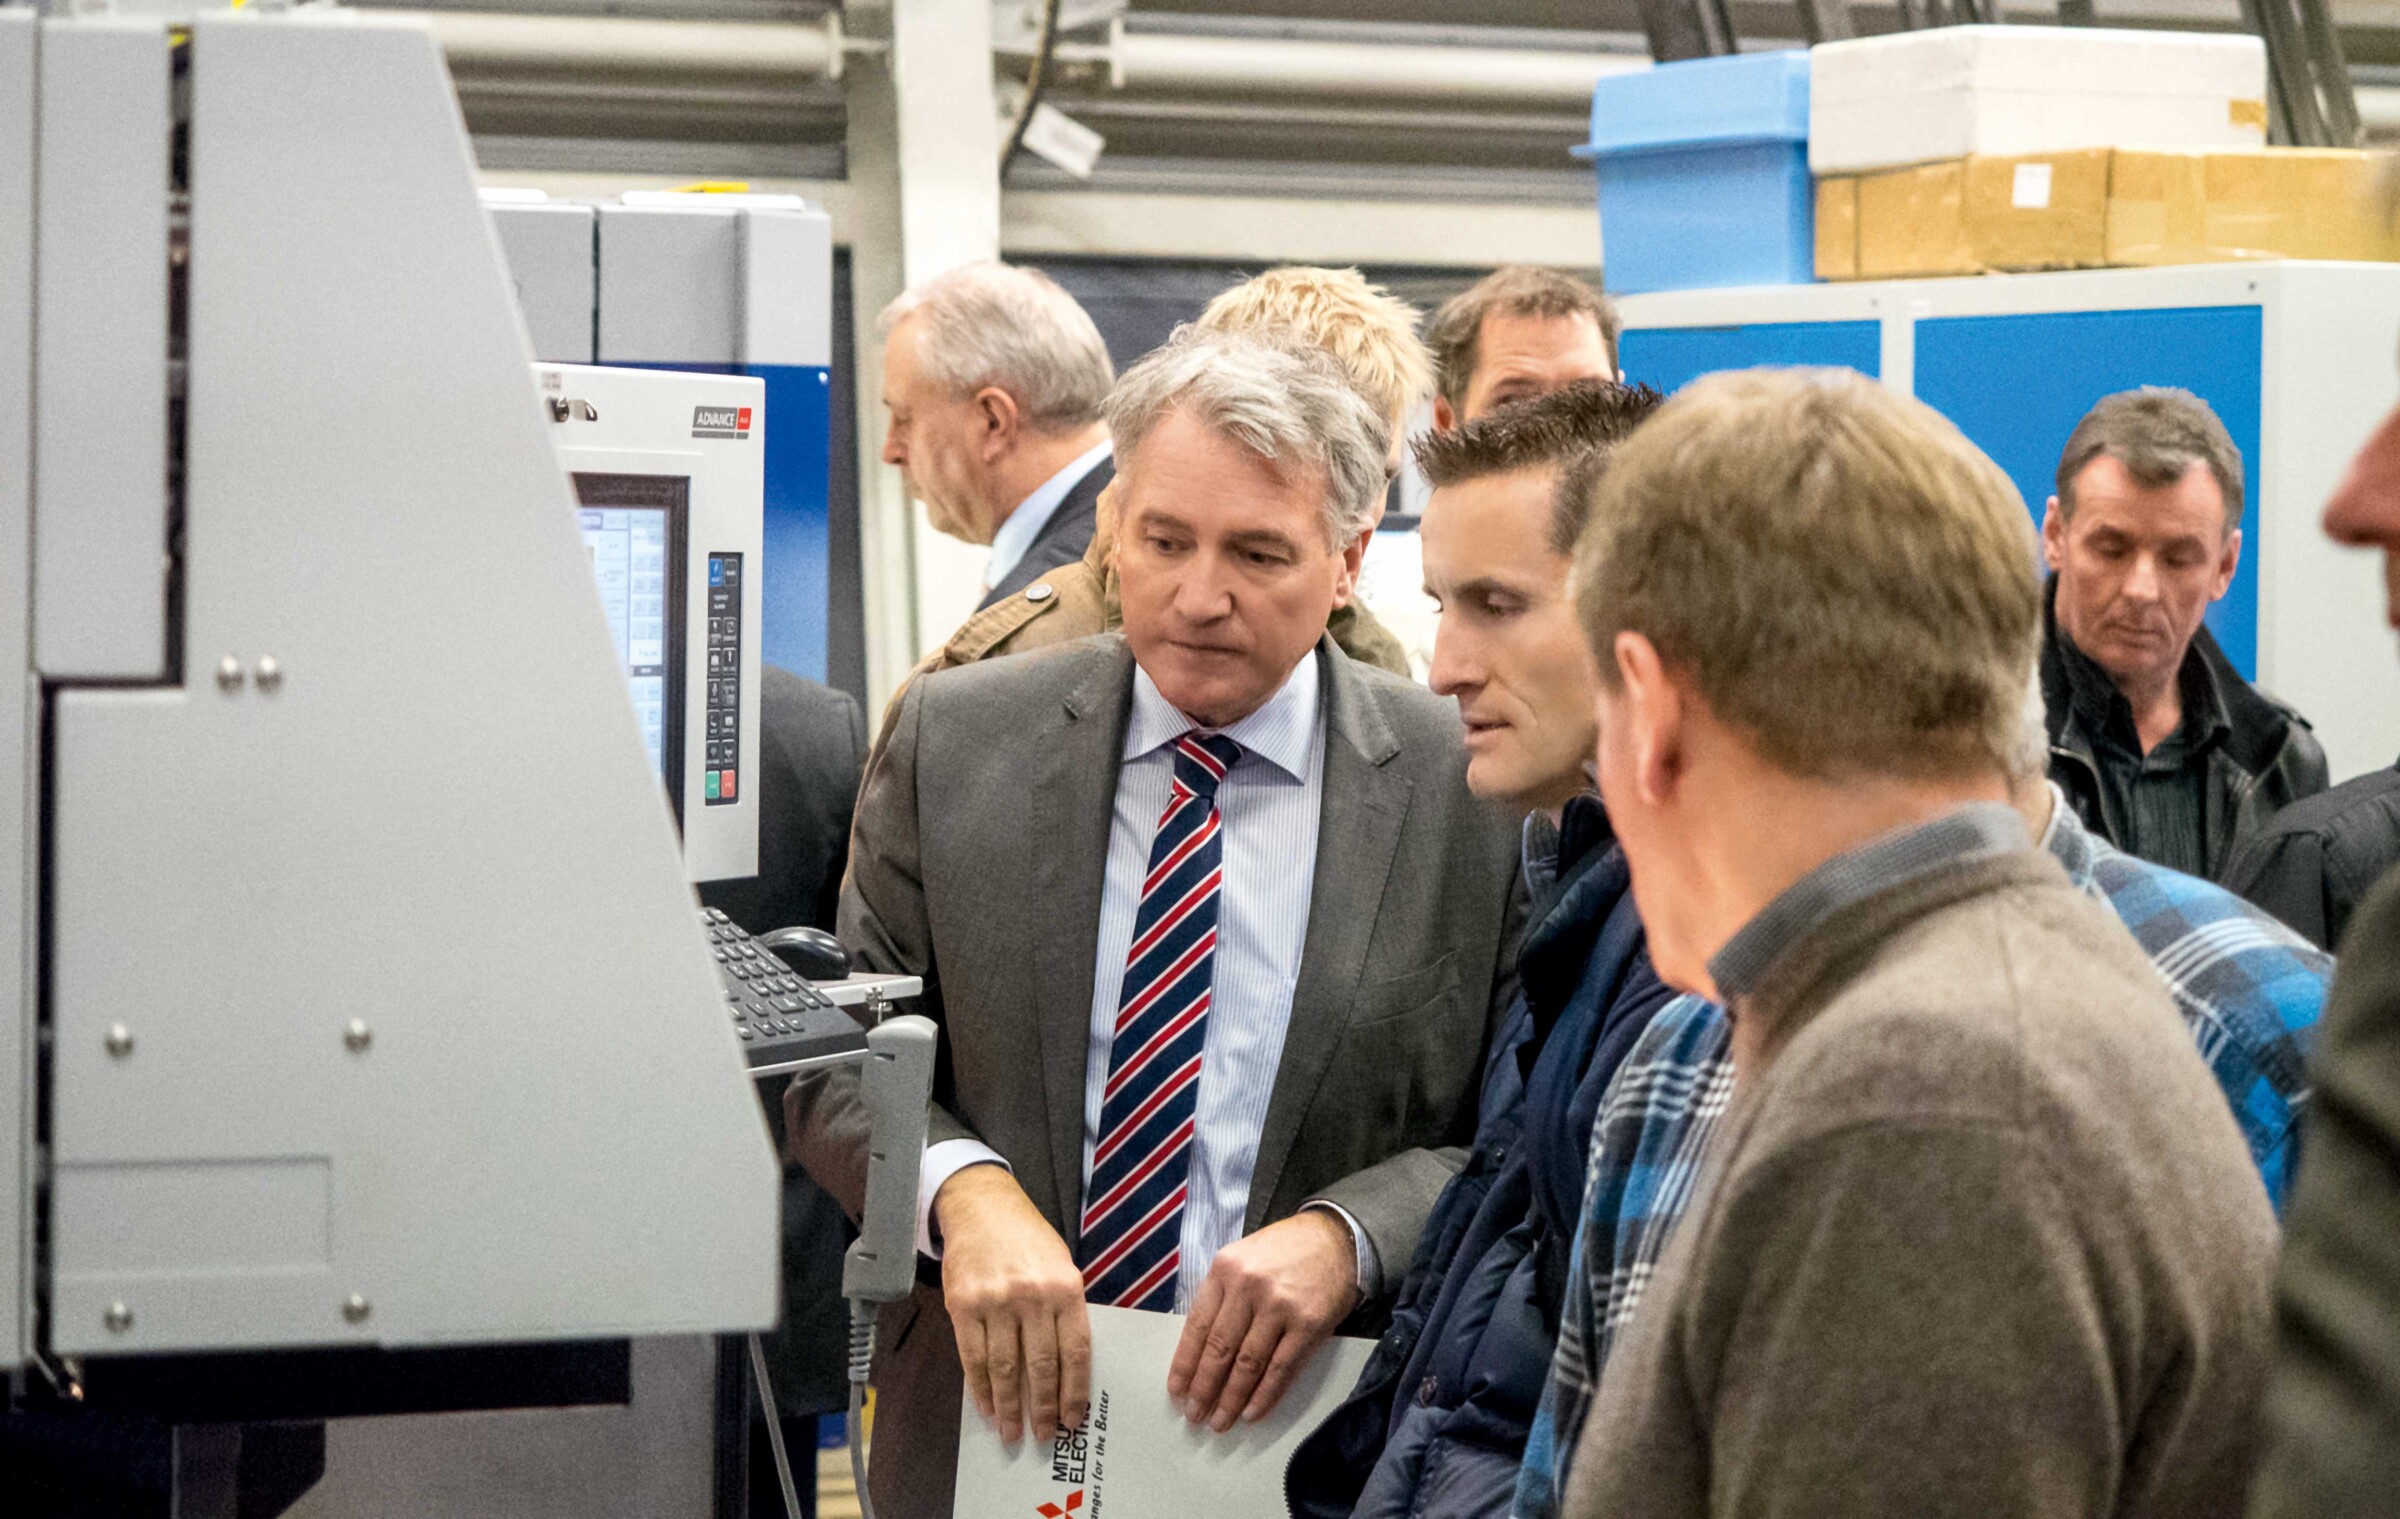 At the official opening of the teaching factory, the newly installed wire-cut EDM attracted lively interest from the expert public.